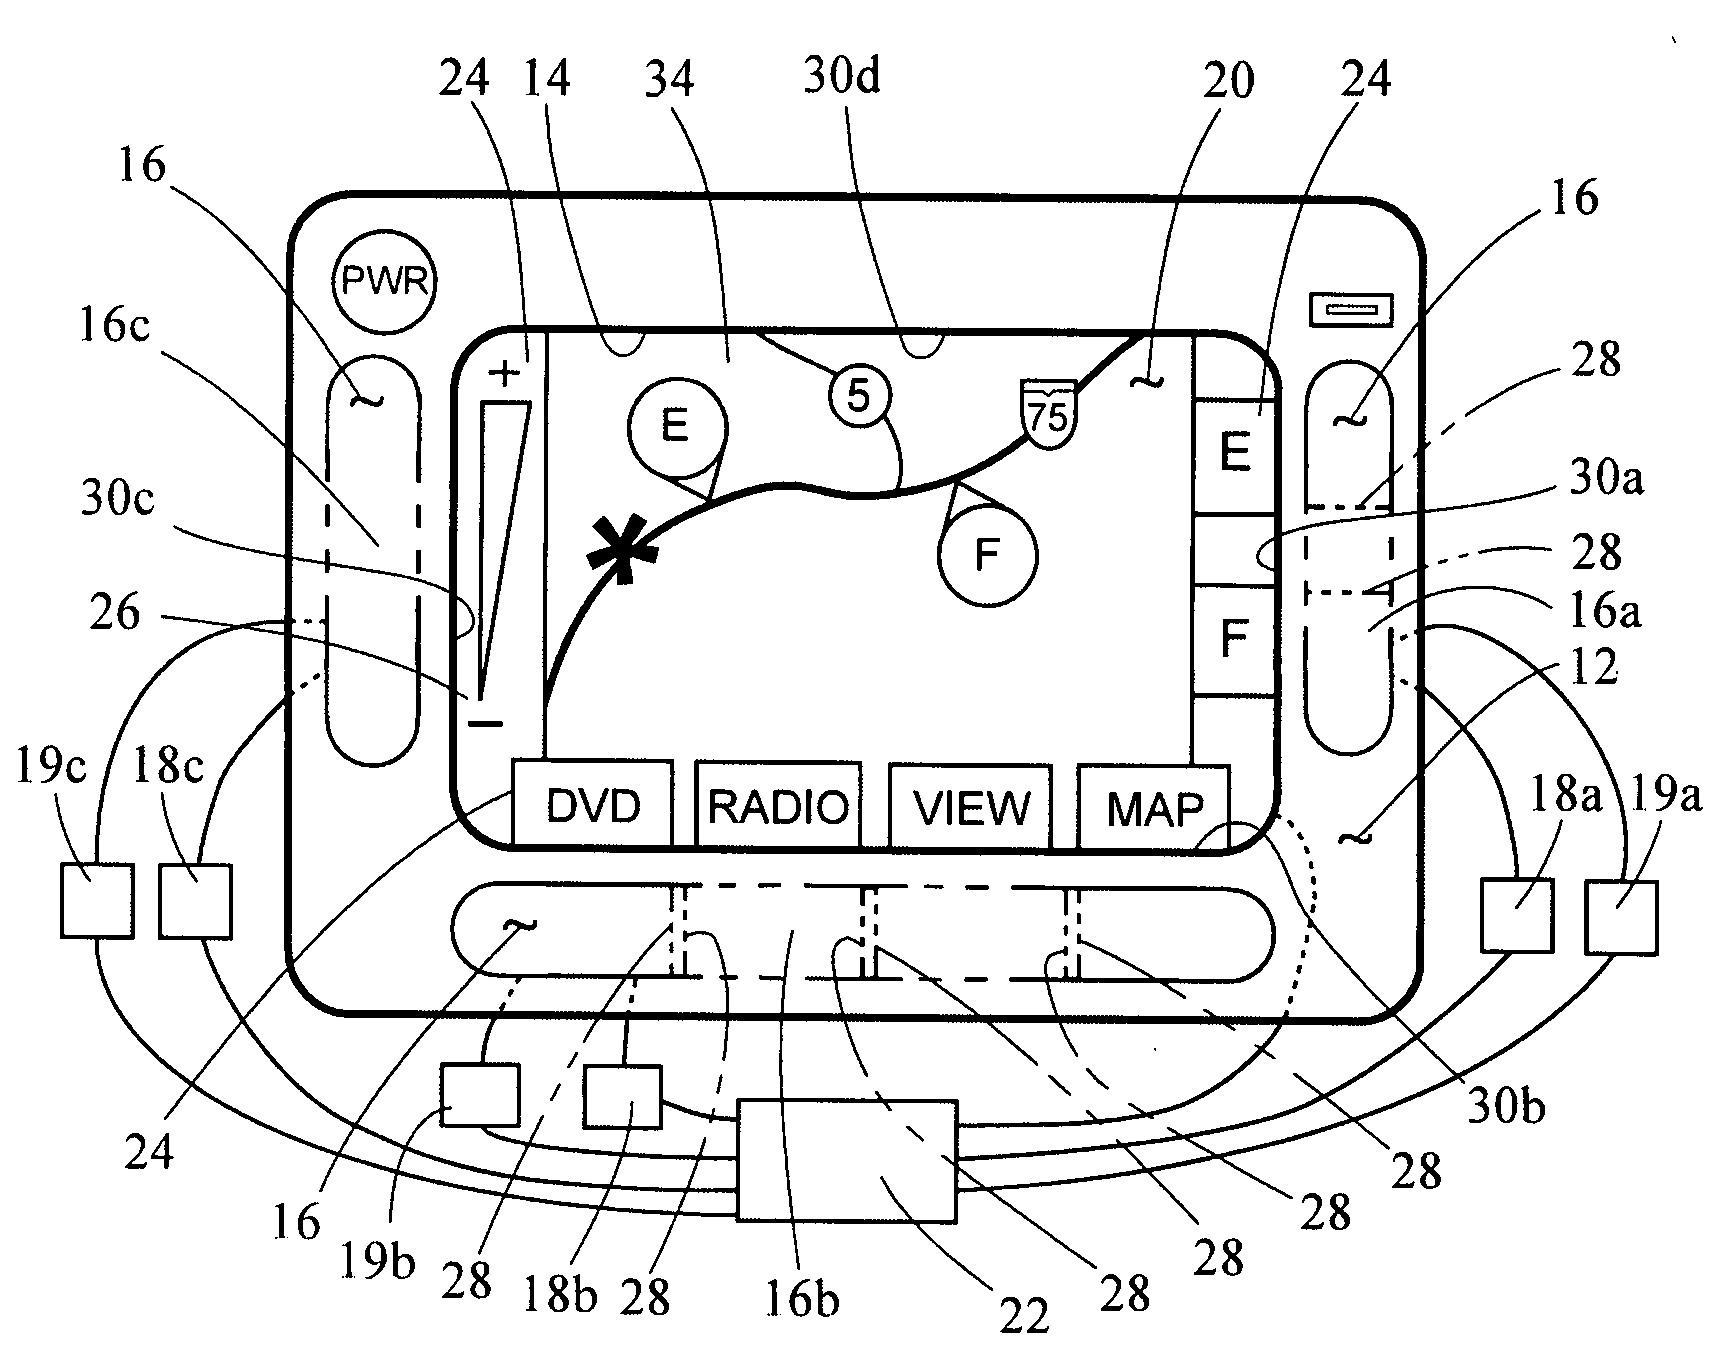 Touch control bezel for display devices